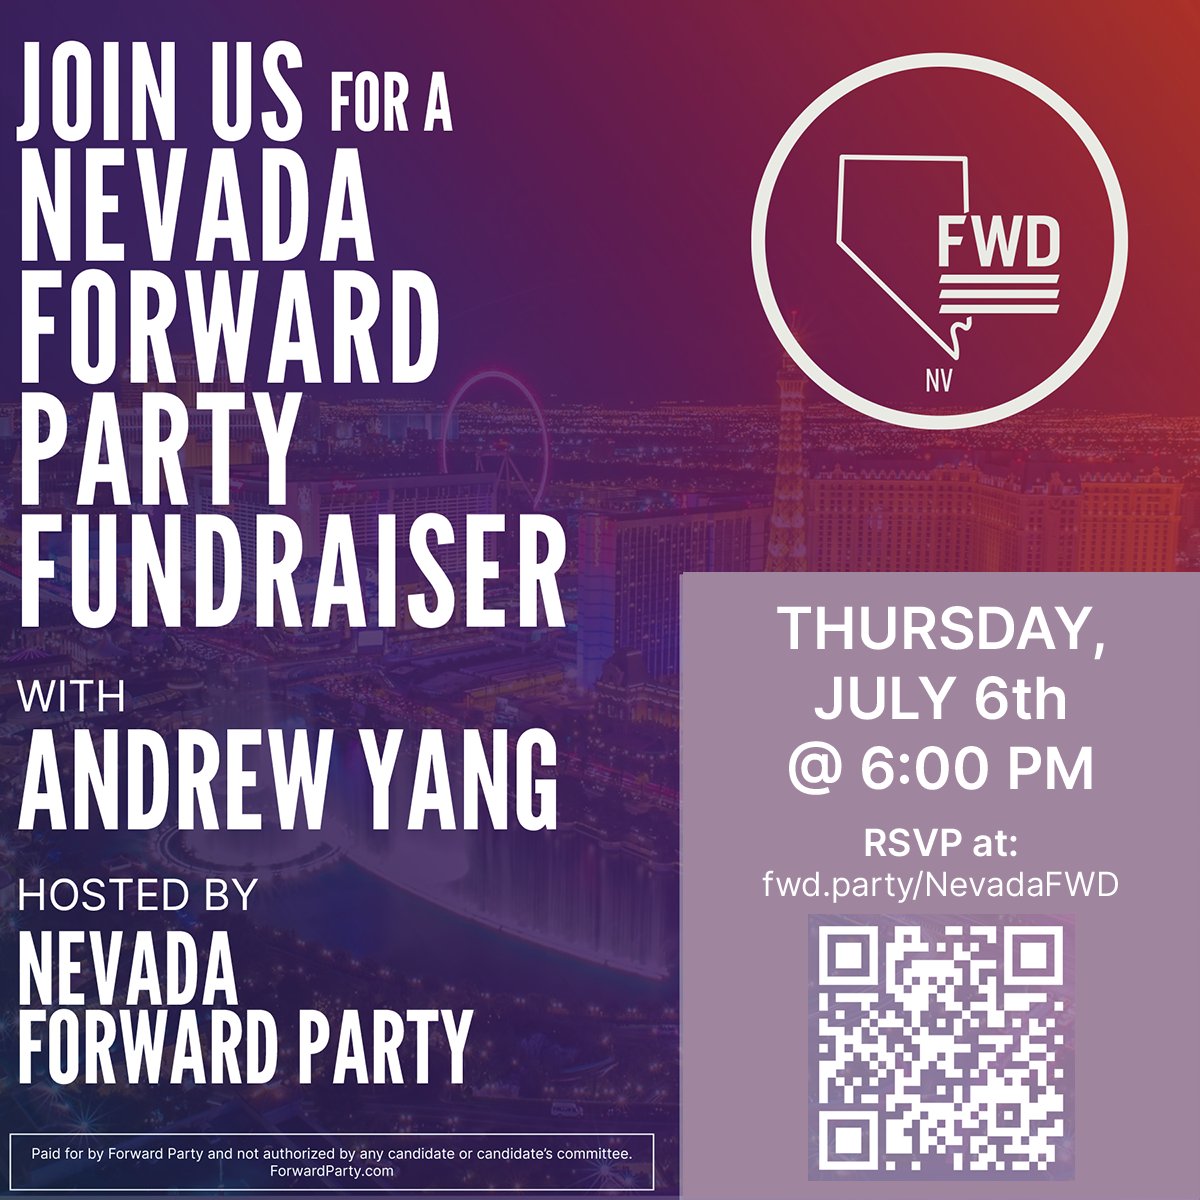 Join us for a virtual fundraiser with @AndrewYang and @FWD_NV. Special Guest Prof. @SondraCosgrove will give updates on Nevada, including #YesOn3 #rankedchoicevoting 

Date 📅:July 6th at 6p PT
RSVP: home.forwardparty.com/cesarmarquez/f…